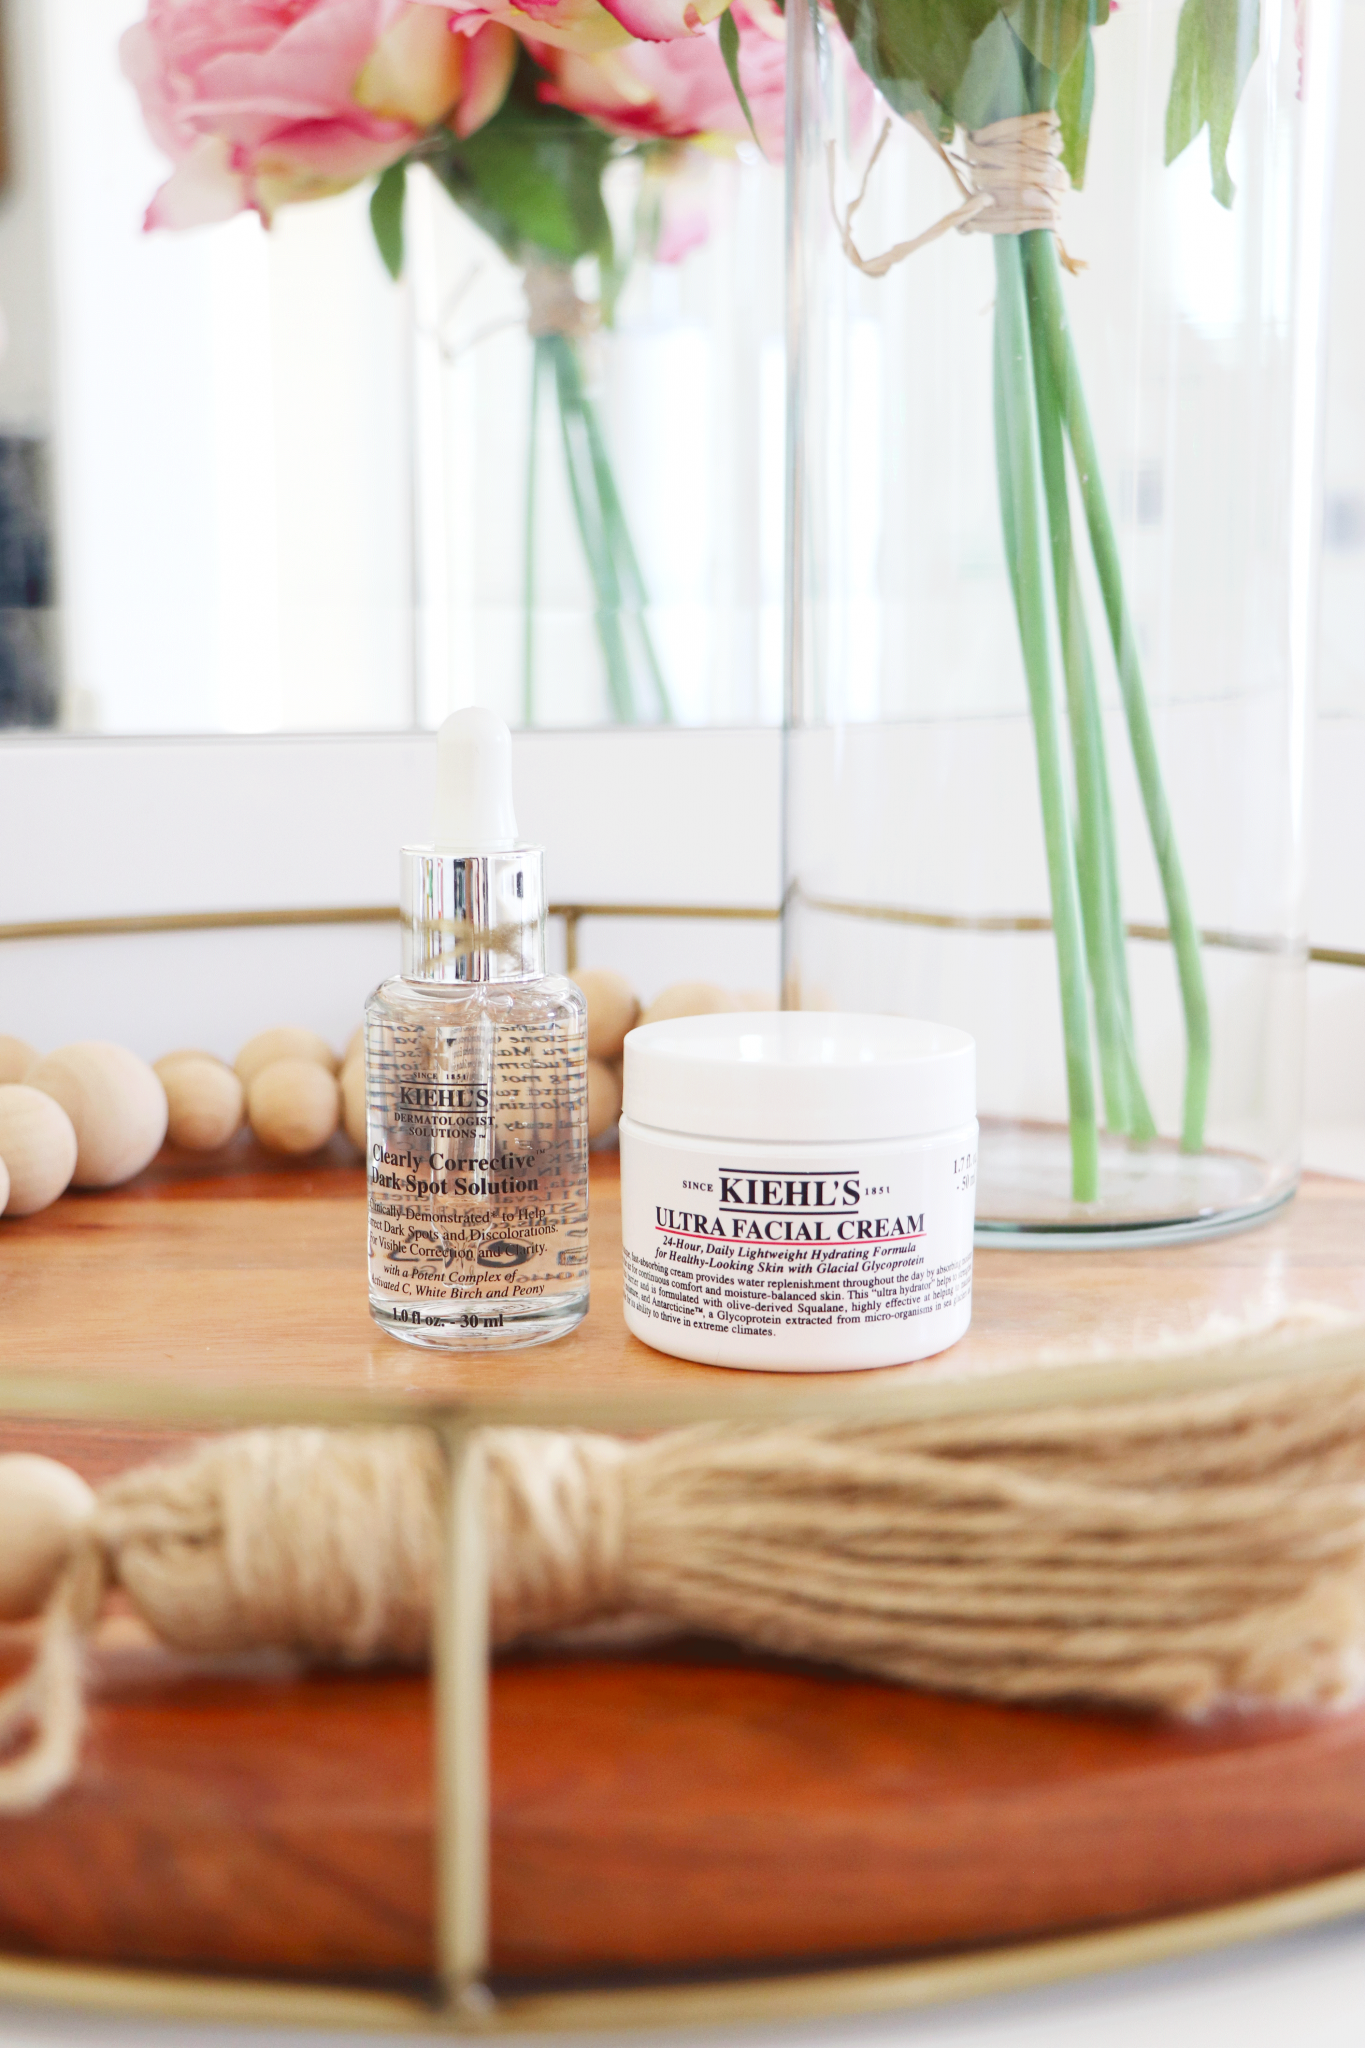 Looking for a few of the best Kiehl's products? Los Angeles Blogger Jamie Lewis is sharing her top 5 Kiehl's must-haves HERE!